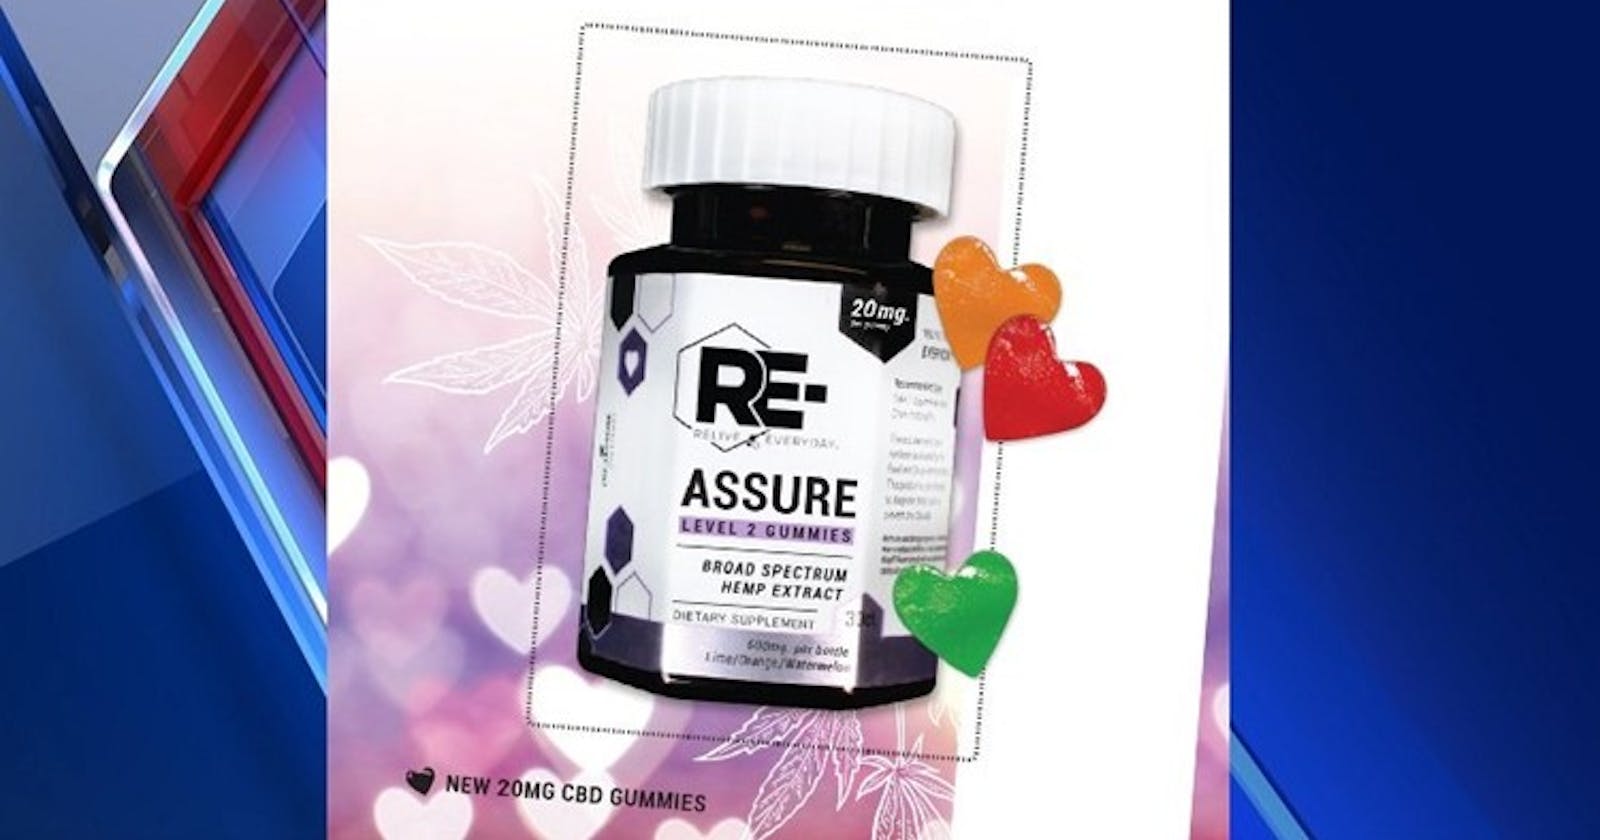 Assure Medical CBD Gummies (Pros and Cons) Is It Scam Or Trusted?